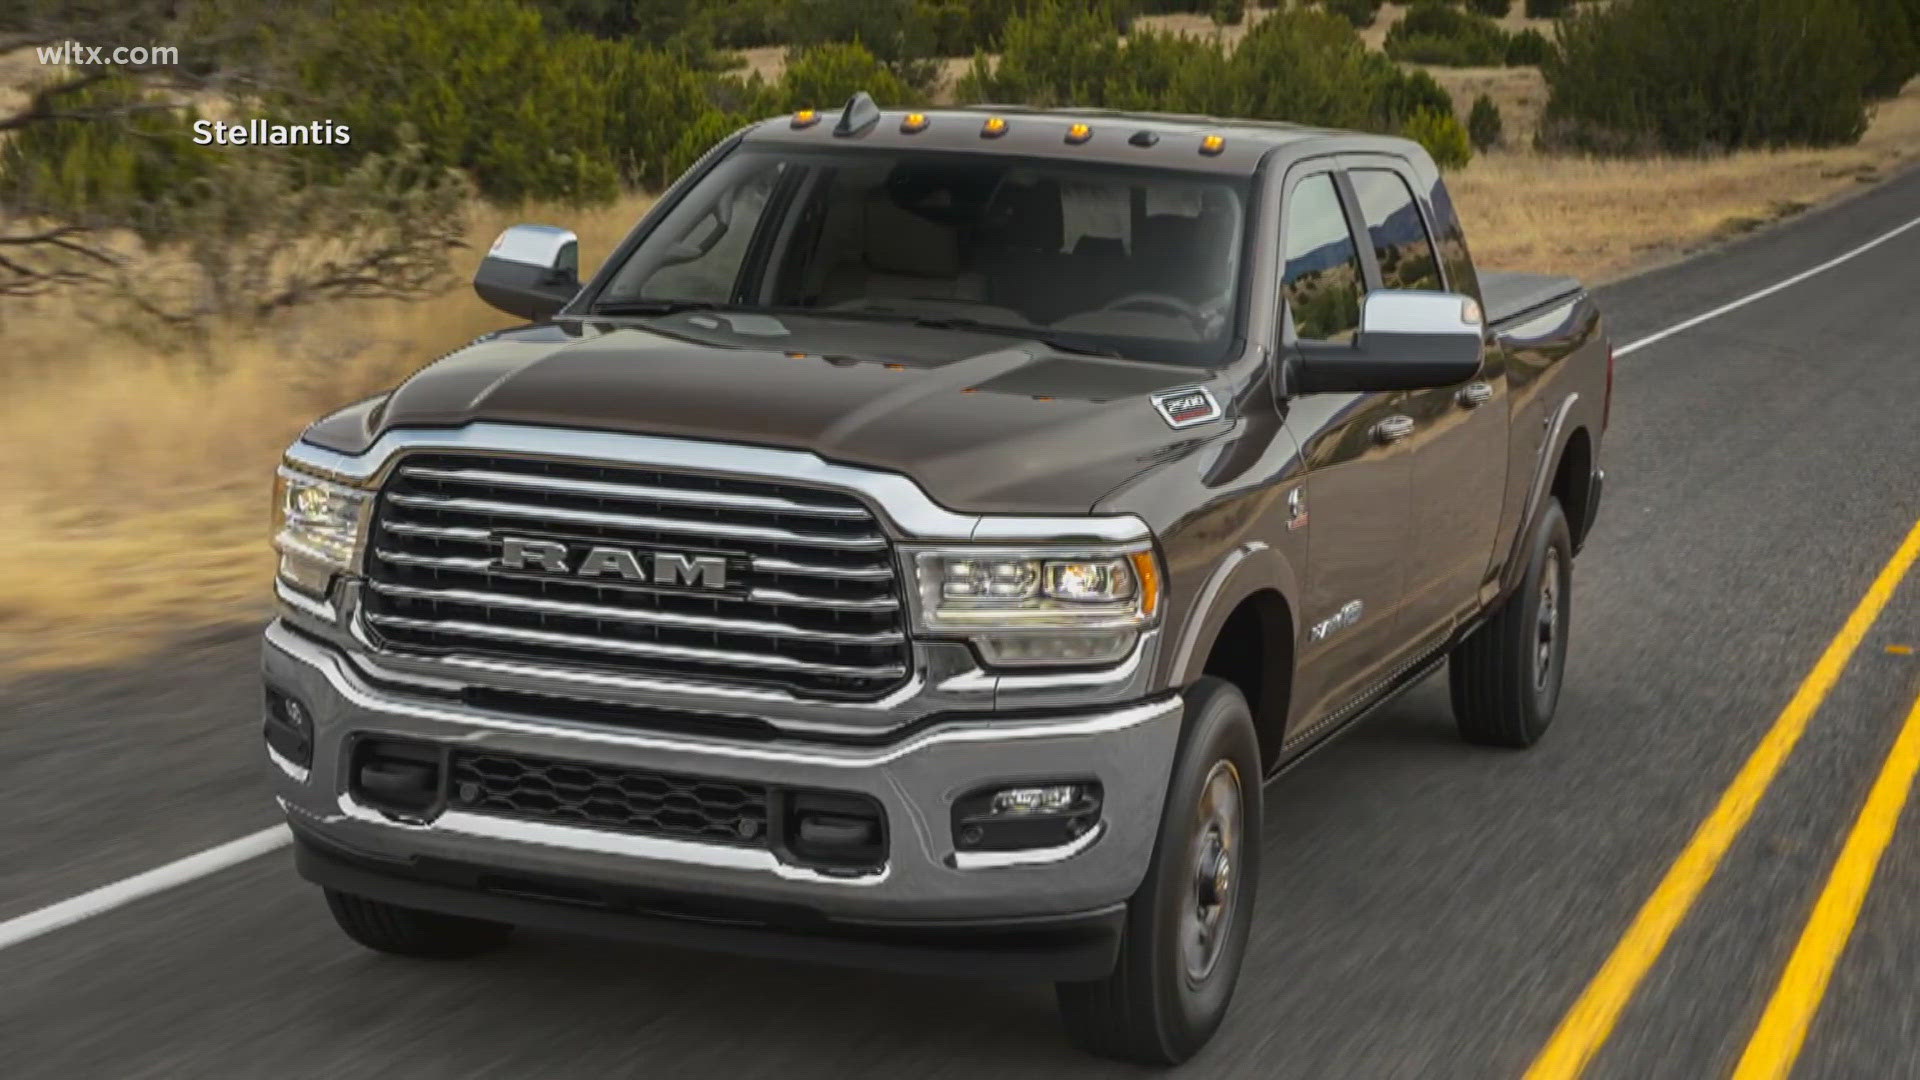 More than 200,000 Dodge Durango SUV's and Ram trucks are under recall because of a risk of vehicle stability.